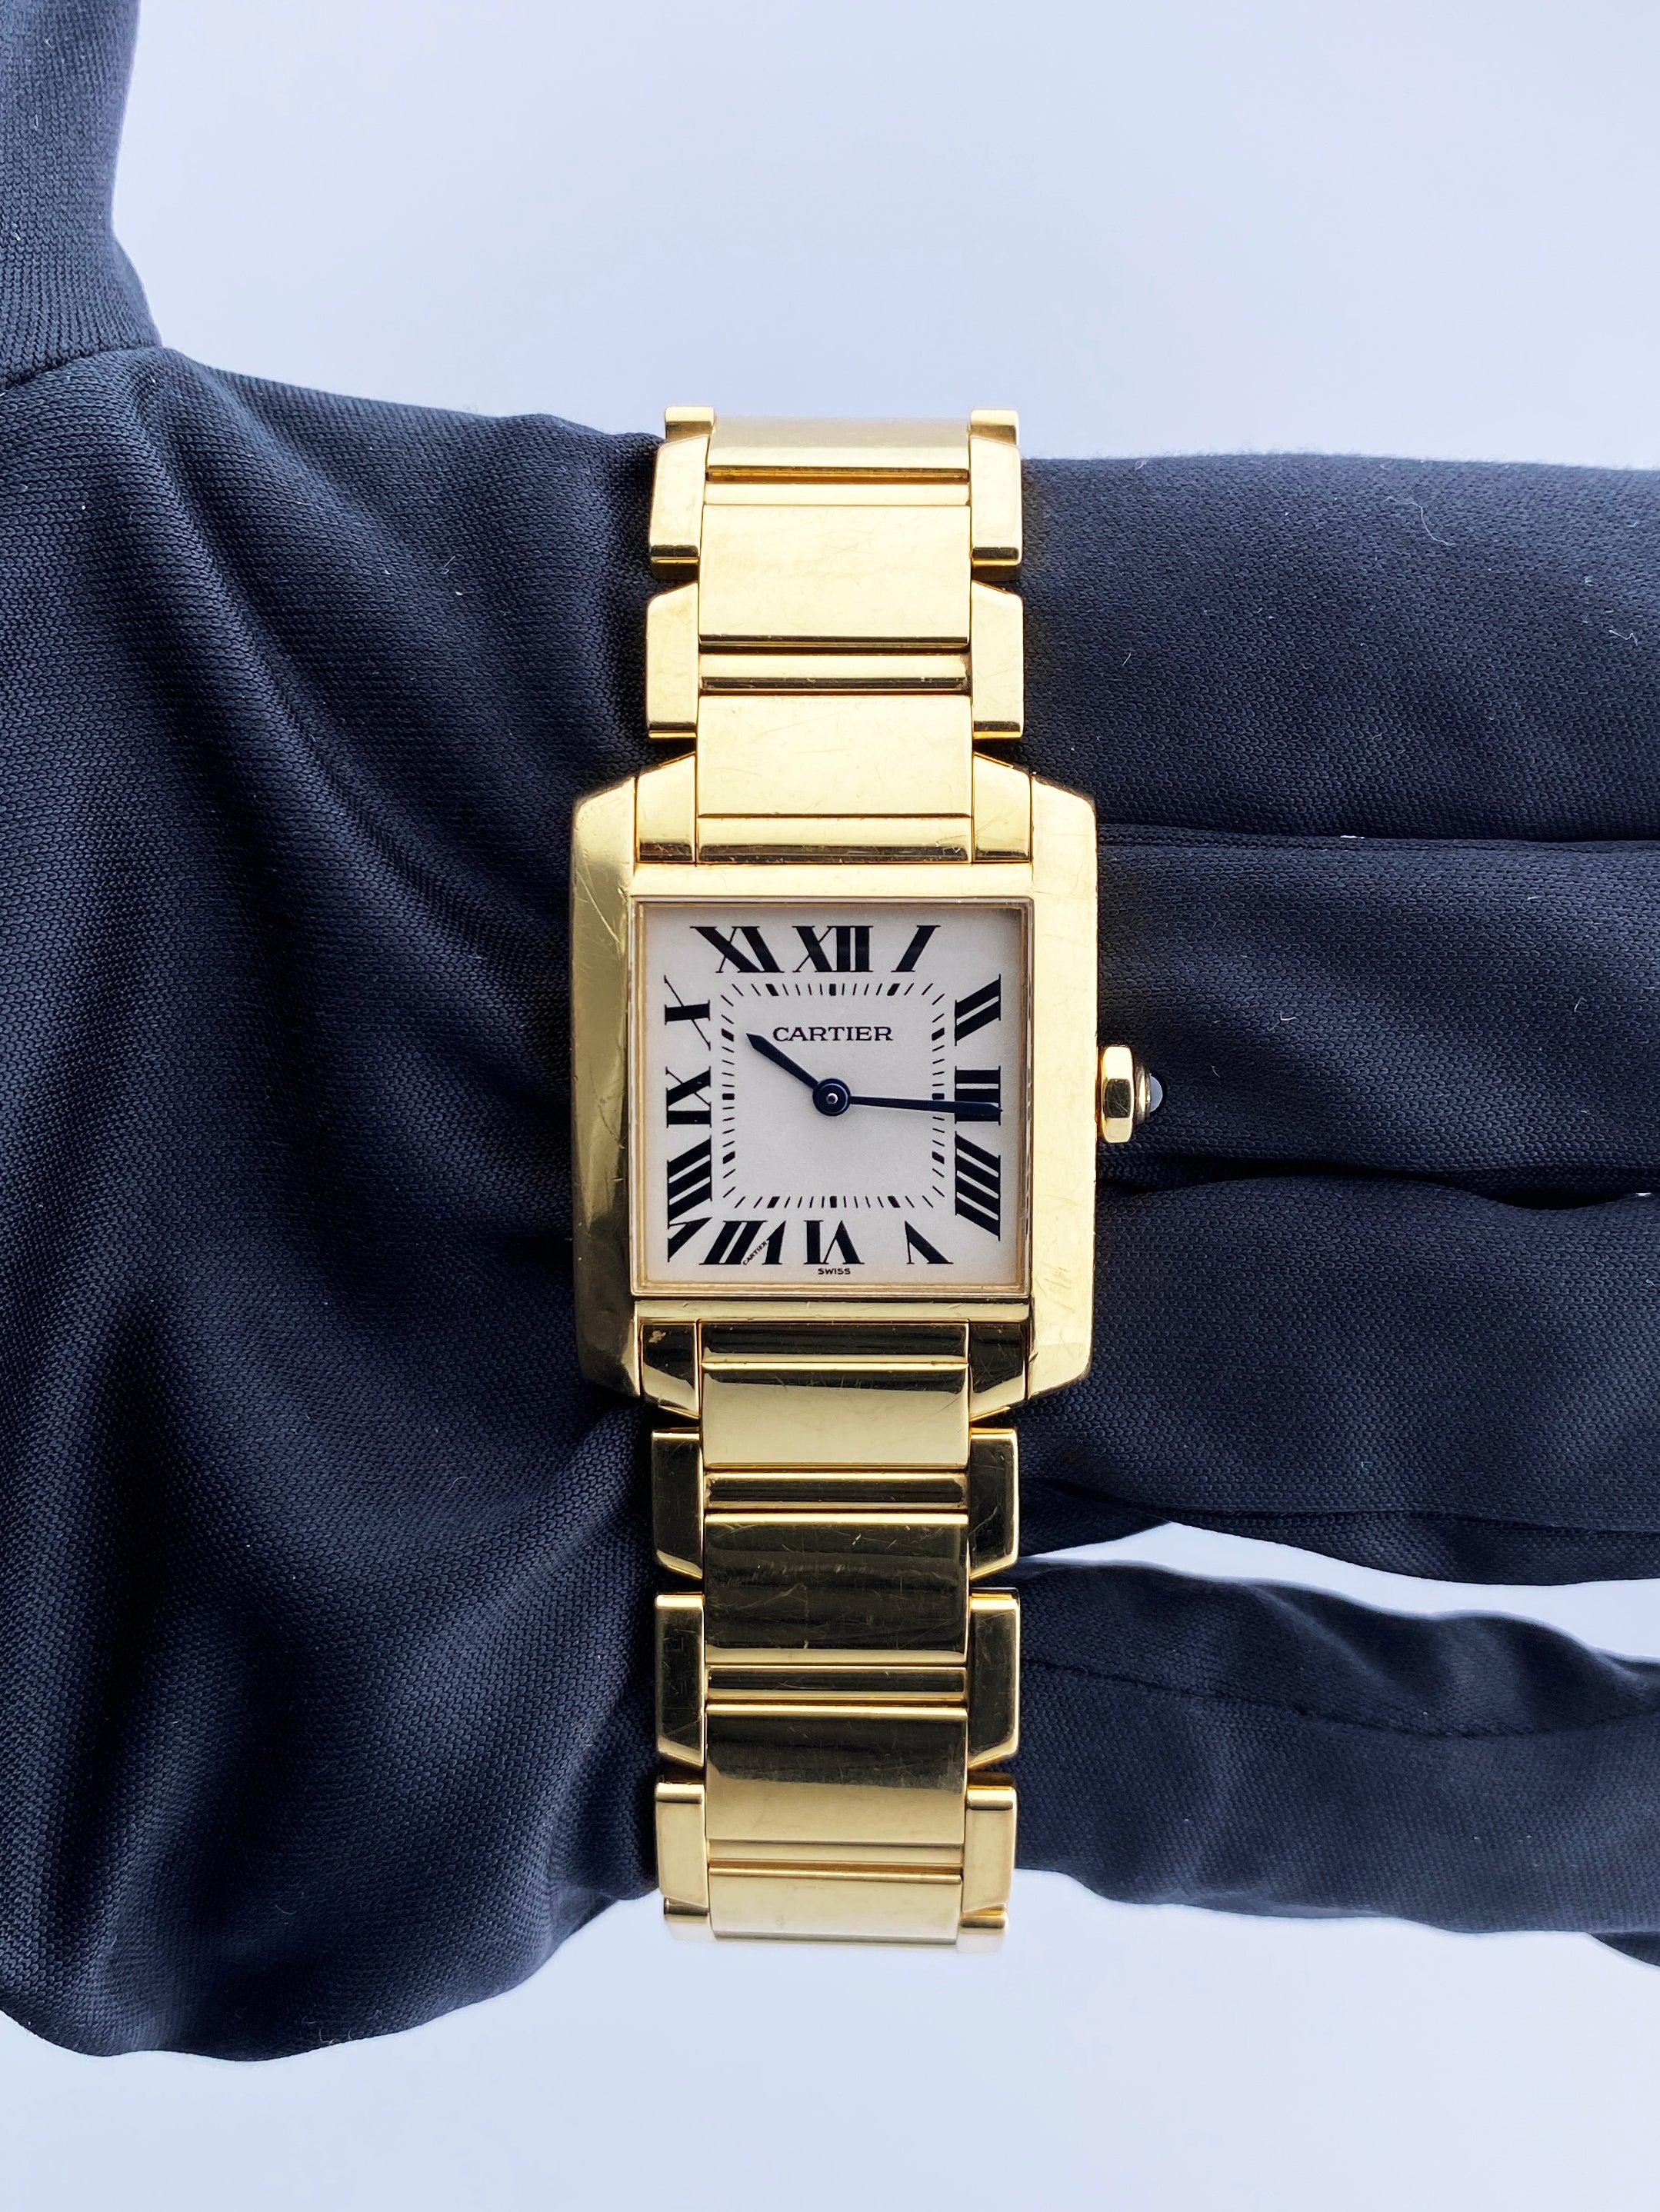 Cartier Tank Francaise 1821 Ladies Watch. 25mm 18k yellow gold case with 18K yellow gold bezel. Off-White dial with blue steel hands and Roman numeral hour markers. Minute markers on the inner dial. 18k yellow gold bracelet with hidden butterfly